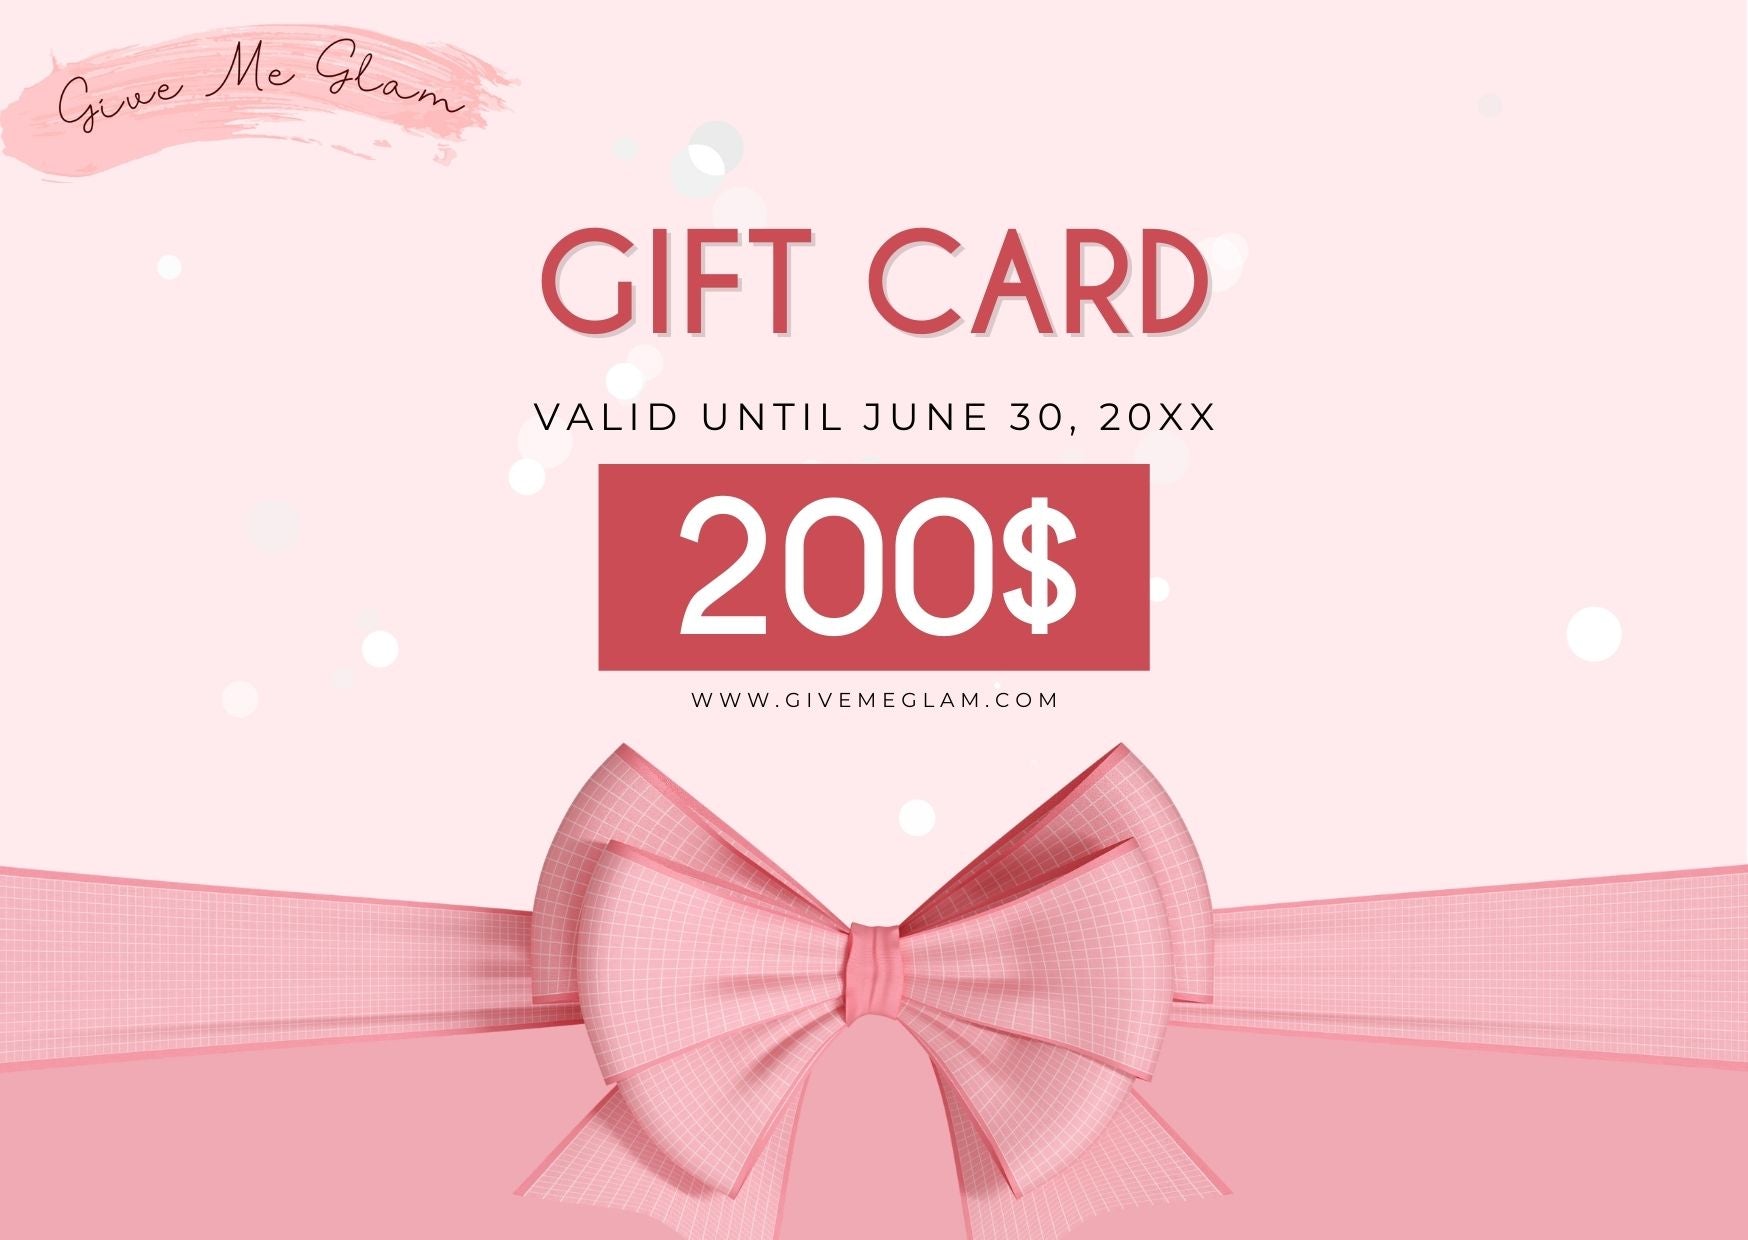 Give Me Glam Gift Card